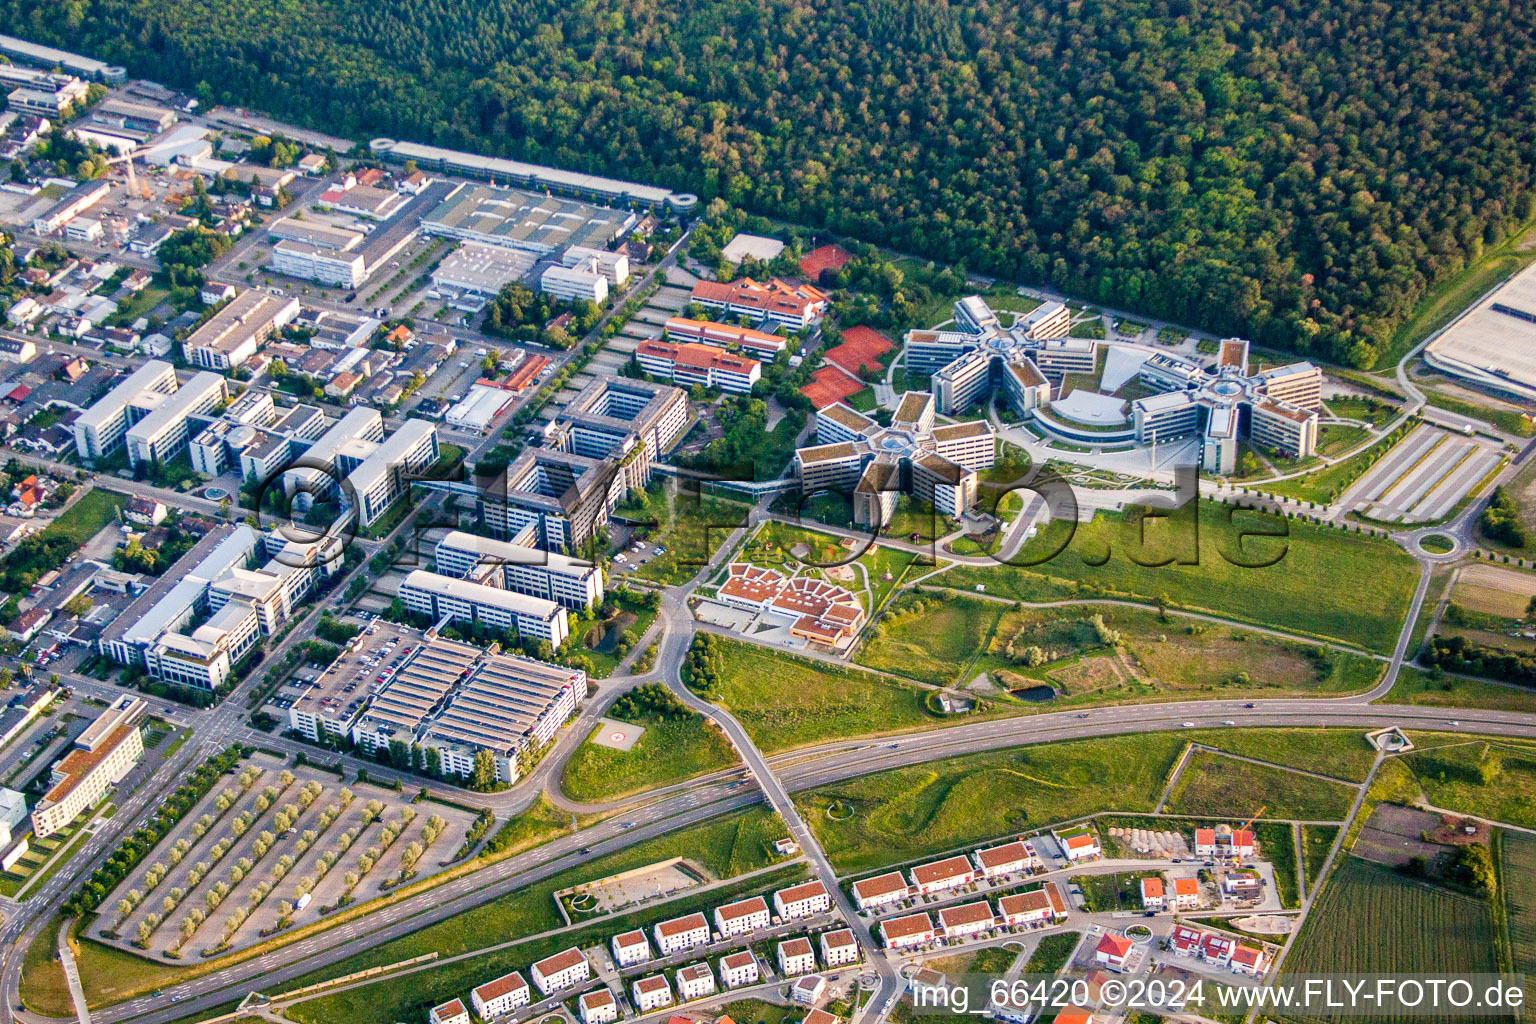 Aerial view of 3 star-shaped Corporate management high-rise buildings of SAP SE in Walldorf in the state Baden-Wurttemberg, Germany